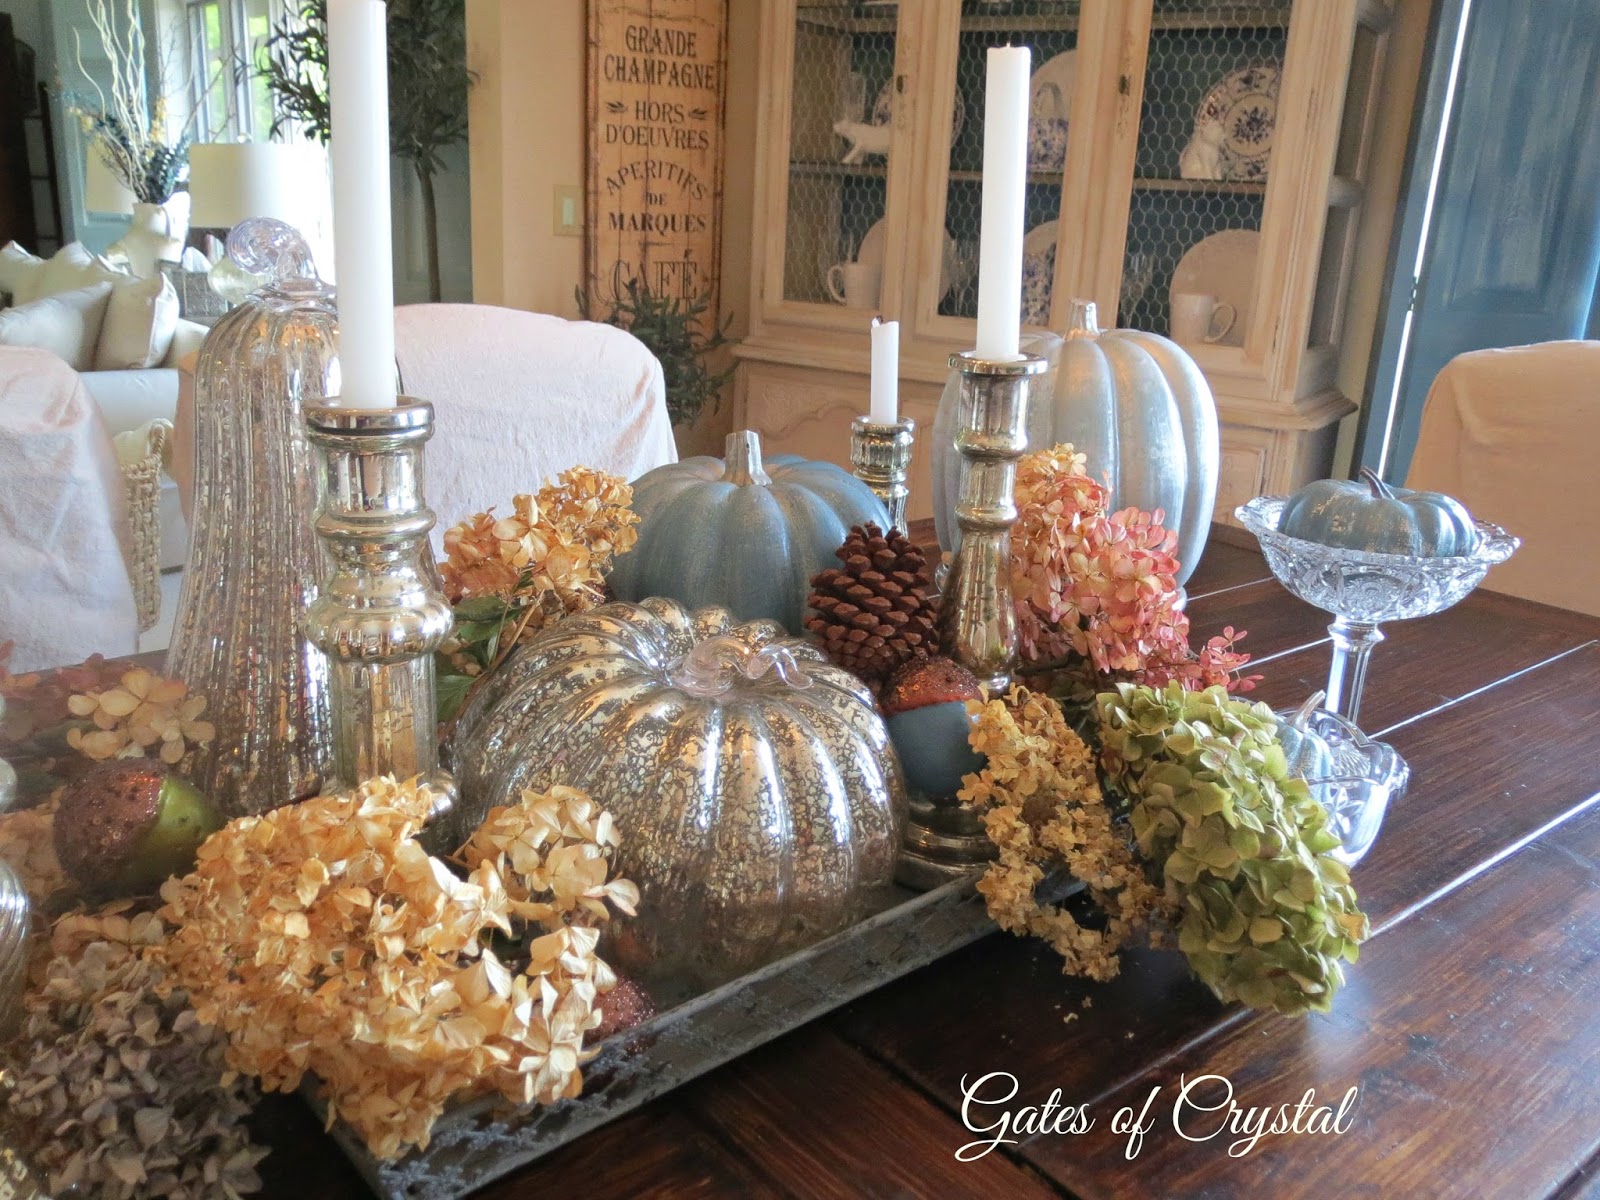 Gates of Crystal: A Fall Centerpiece in the Dining Room